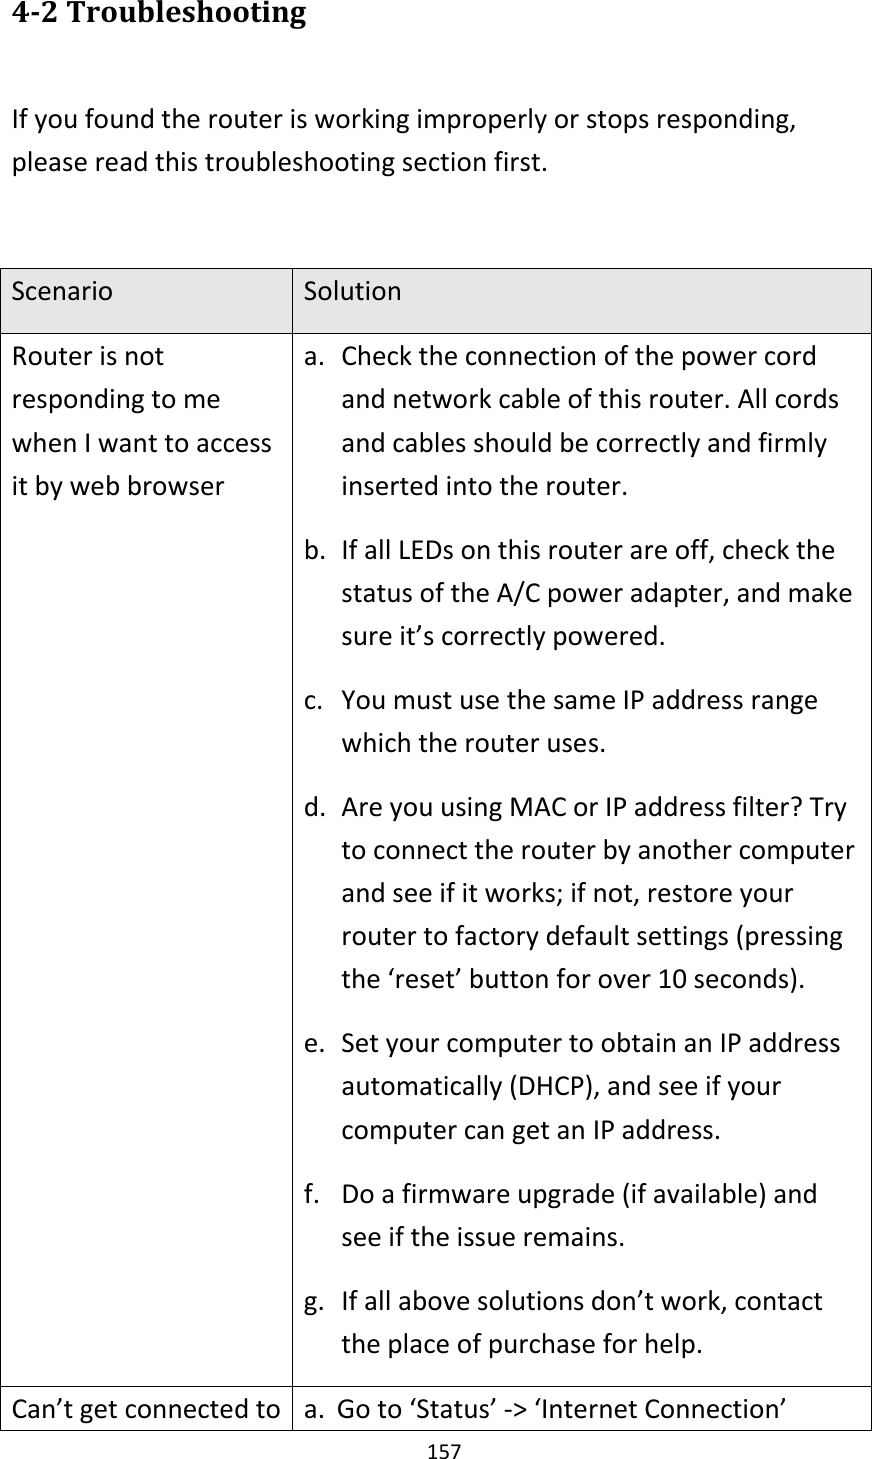 157 4-2 Troubleshooting  If you found the router is working improperly or stops responding, please read this troubleshooting section first.    Scenario Solution Router is not responding to me when I want to access it by web browser a. Check the connection of the power cord and network cable of this router. All cords and cables should be correctly and firmly inserted into the router. b. If all LEDs on this router are off, check the status of the A/C power adapter, and make sure it’s correctly powered. c. You must use the same IP address range which the router uses. d. Are you using MAC or IP address filter? Try to connect the router by another computer and see if it works; if not, restore your router to factory default settings (pressing the ‘reset’ button for over 10 seconds). e. Set your computer to obtain an IP address automatically (DHCP), and see if your computer can get an IP address. f. Do a firmware upgrade (if available) and see if the issue remains. g. If all above solutions don’t work, contact the place of purchase for help. Can’t get connected to a. Go to ‘Status’ -&gt; ‘Internet Connection’ 